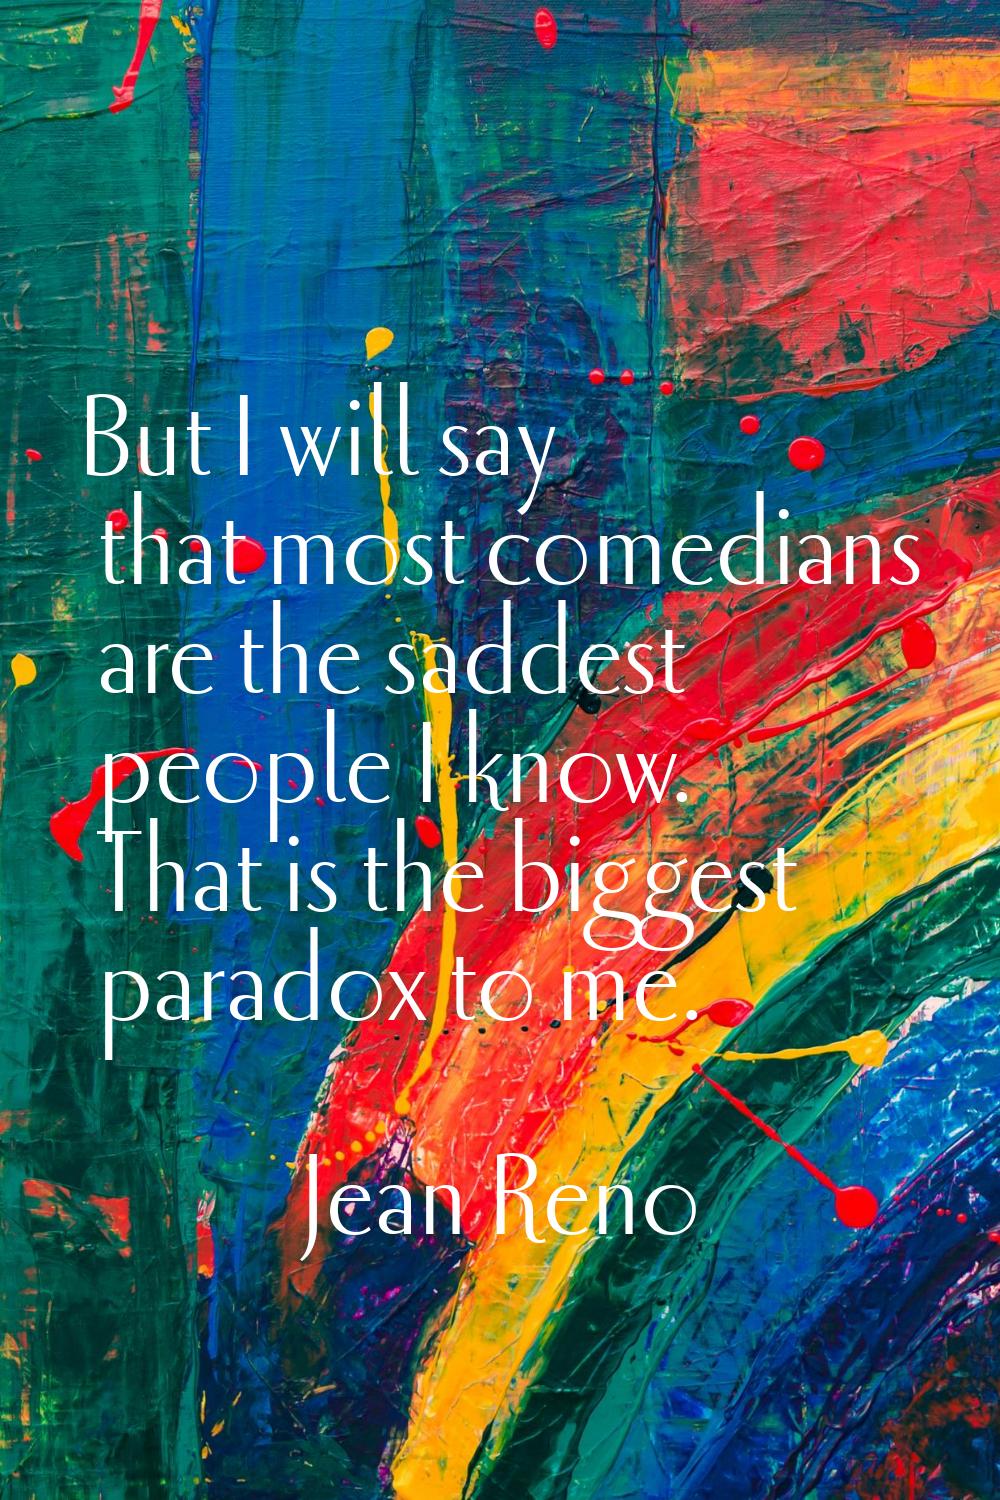 But I will say that most comedians are the saddest people I know. That is the biggest paradox to me